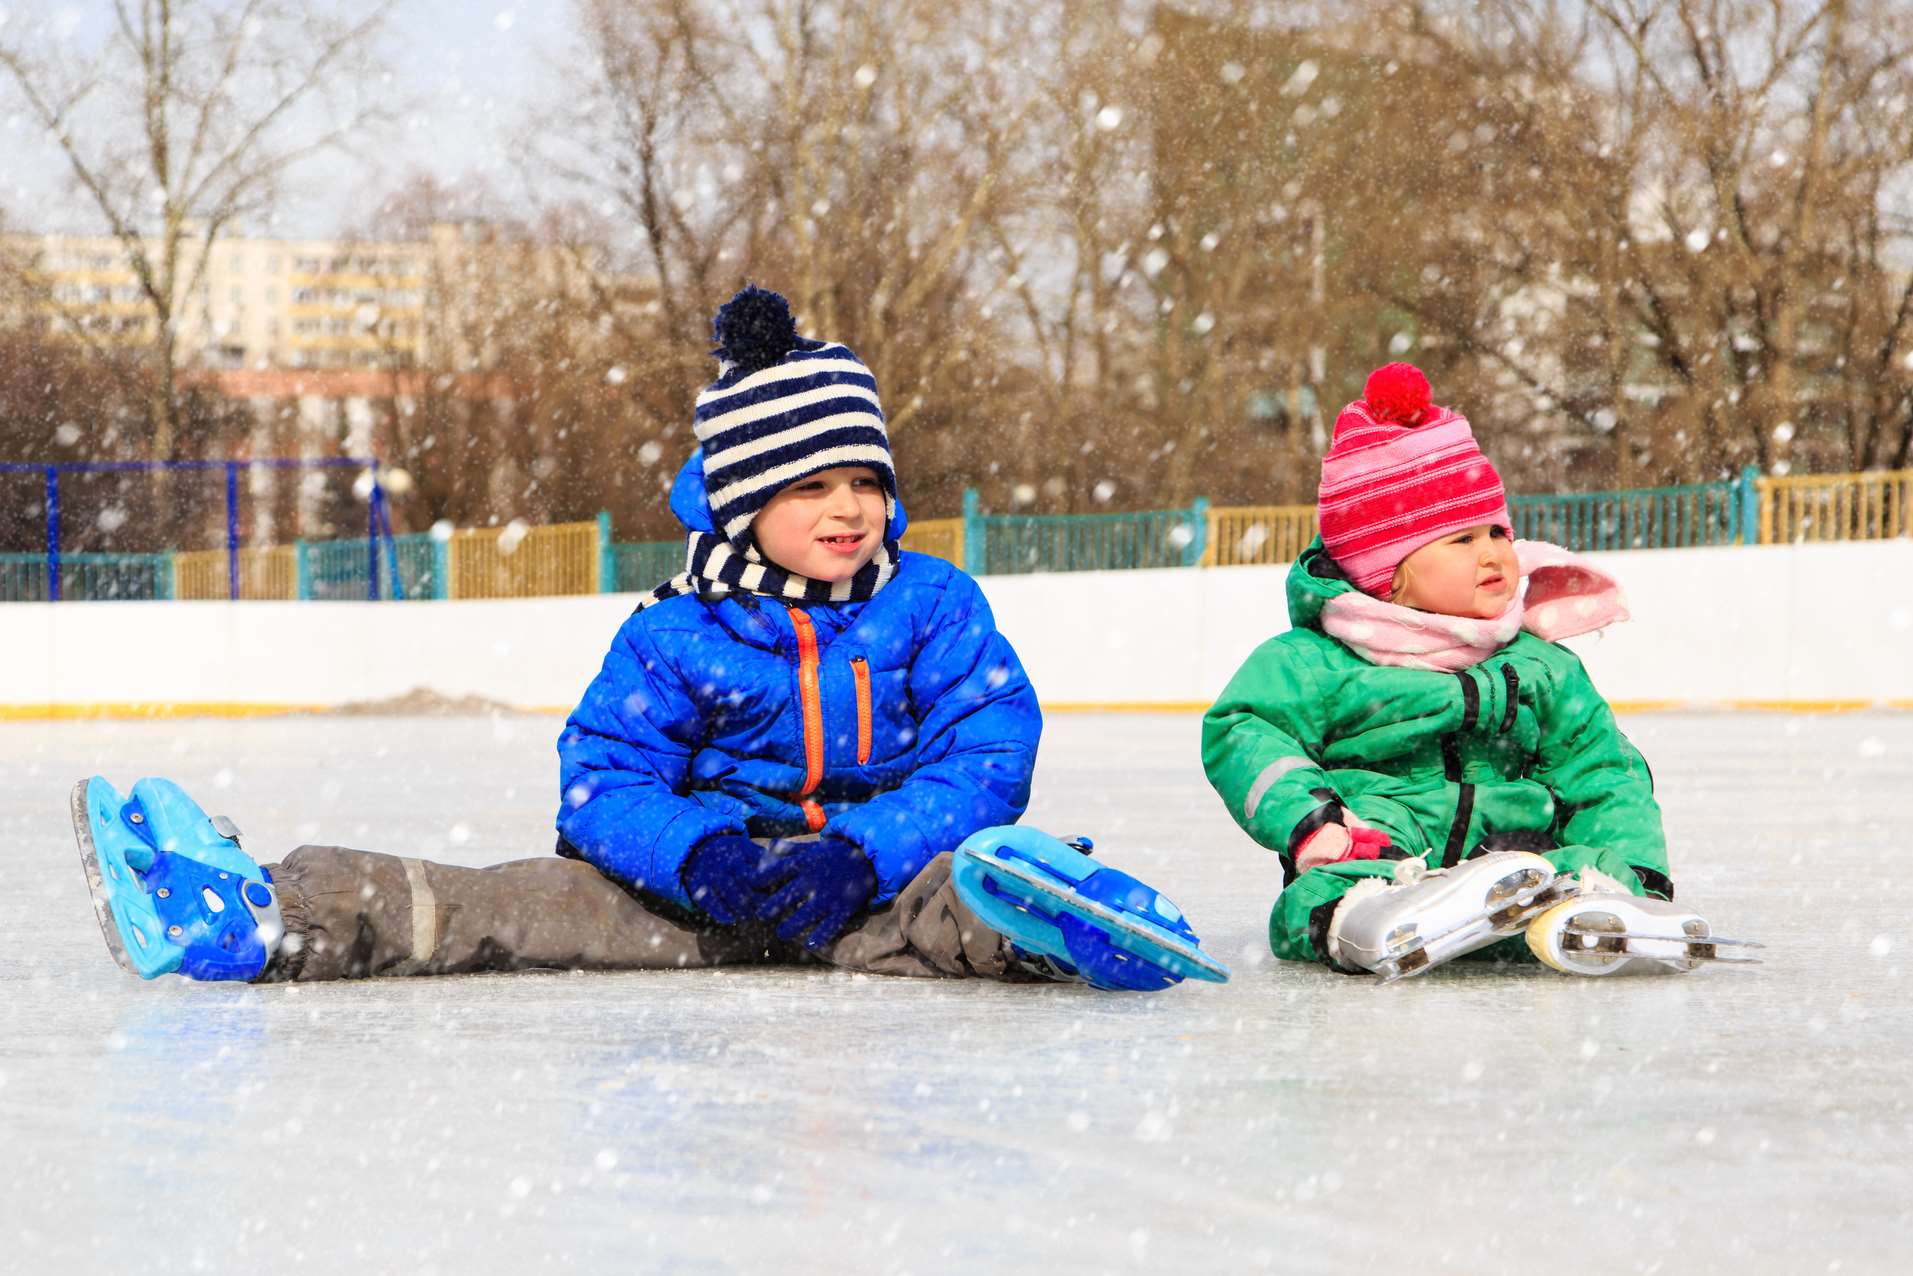 Ice skating is on offer across Kent this winter